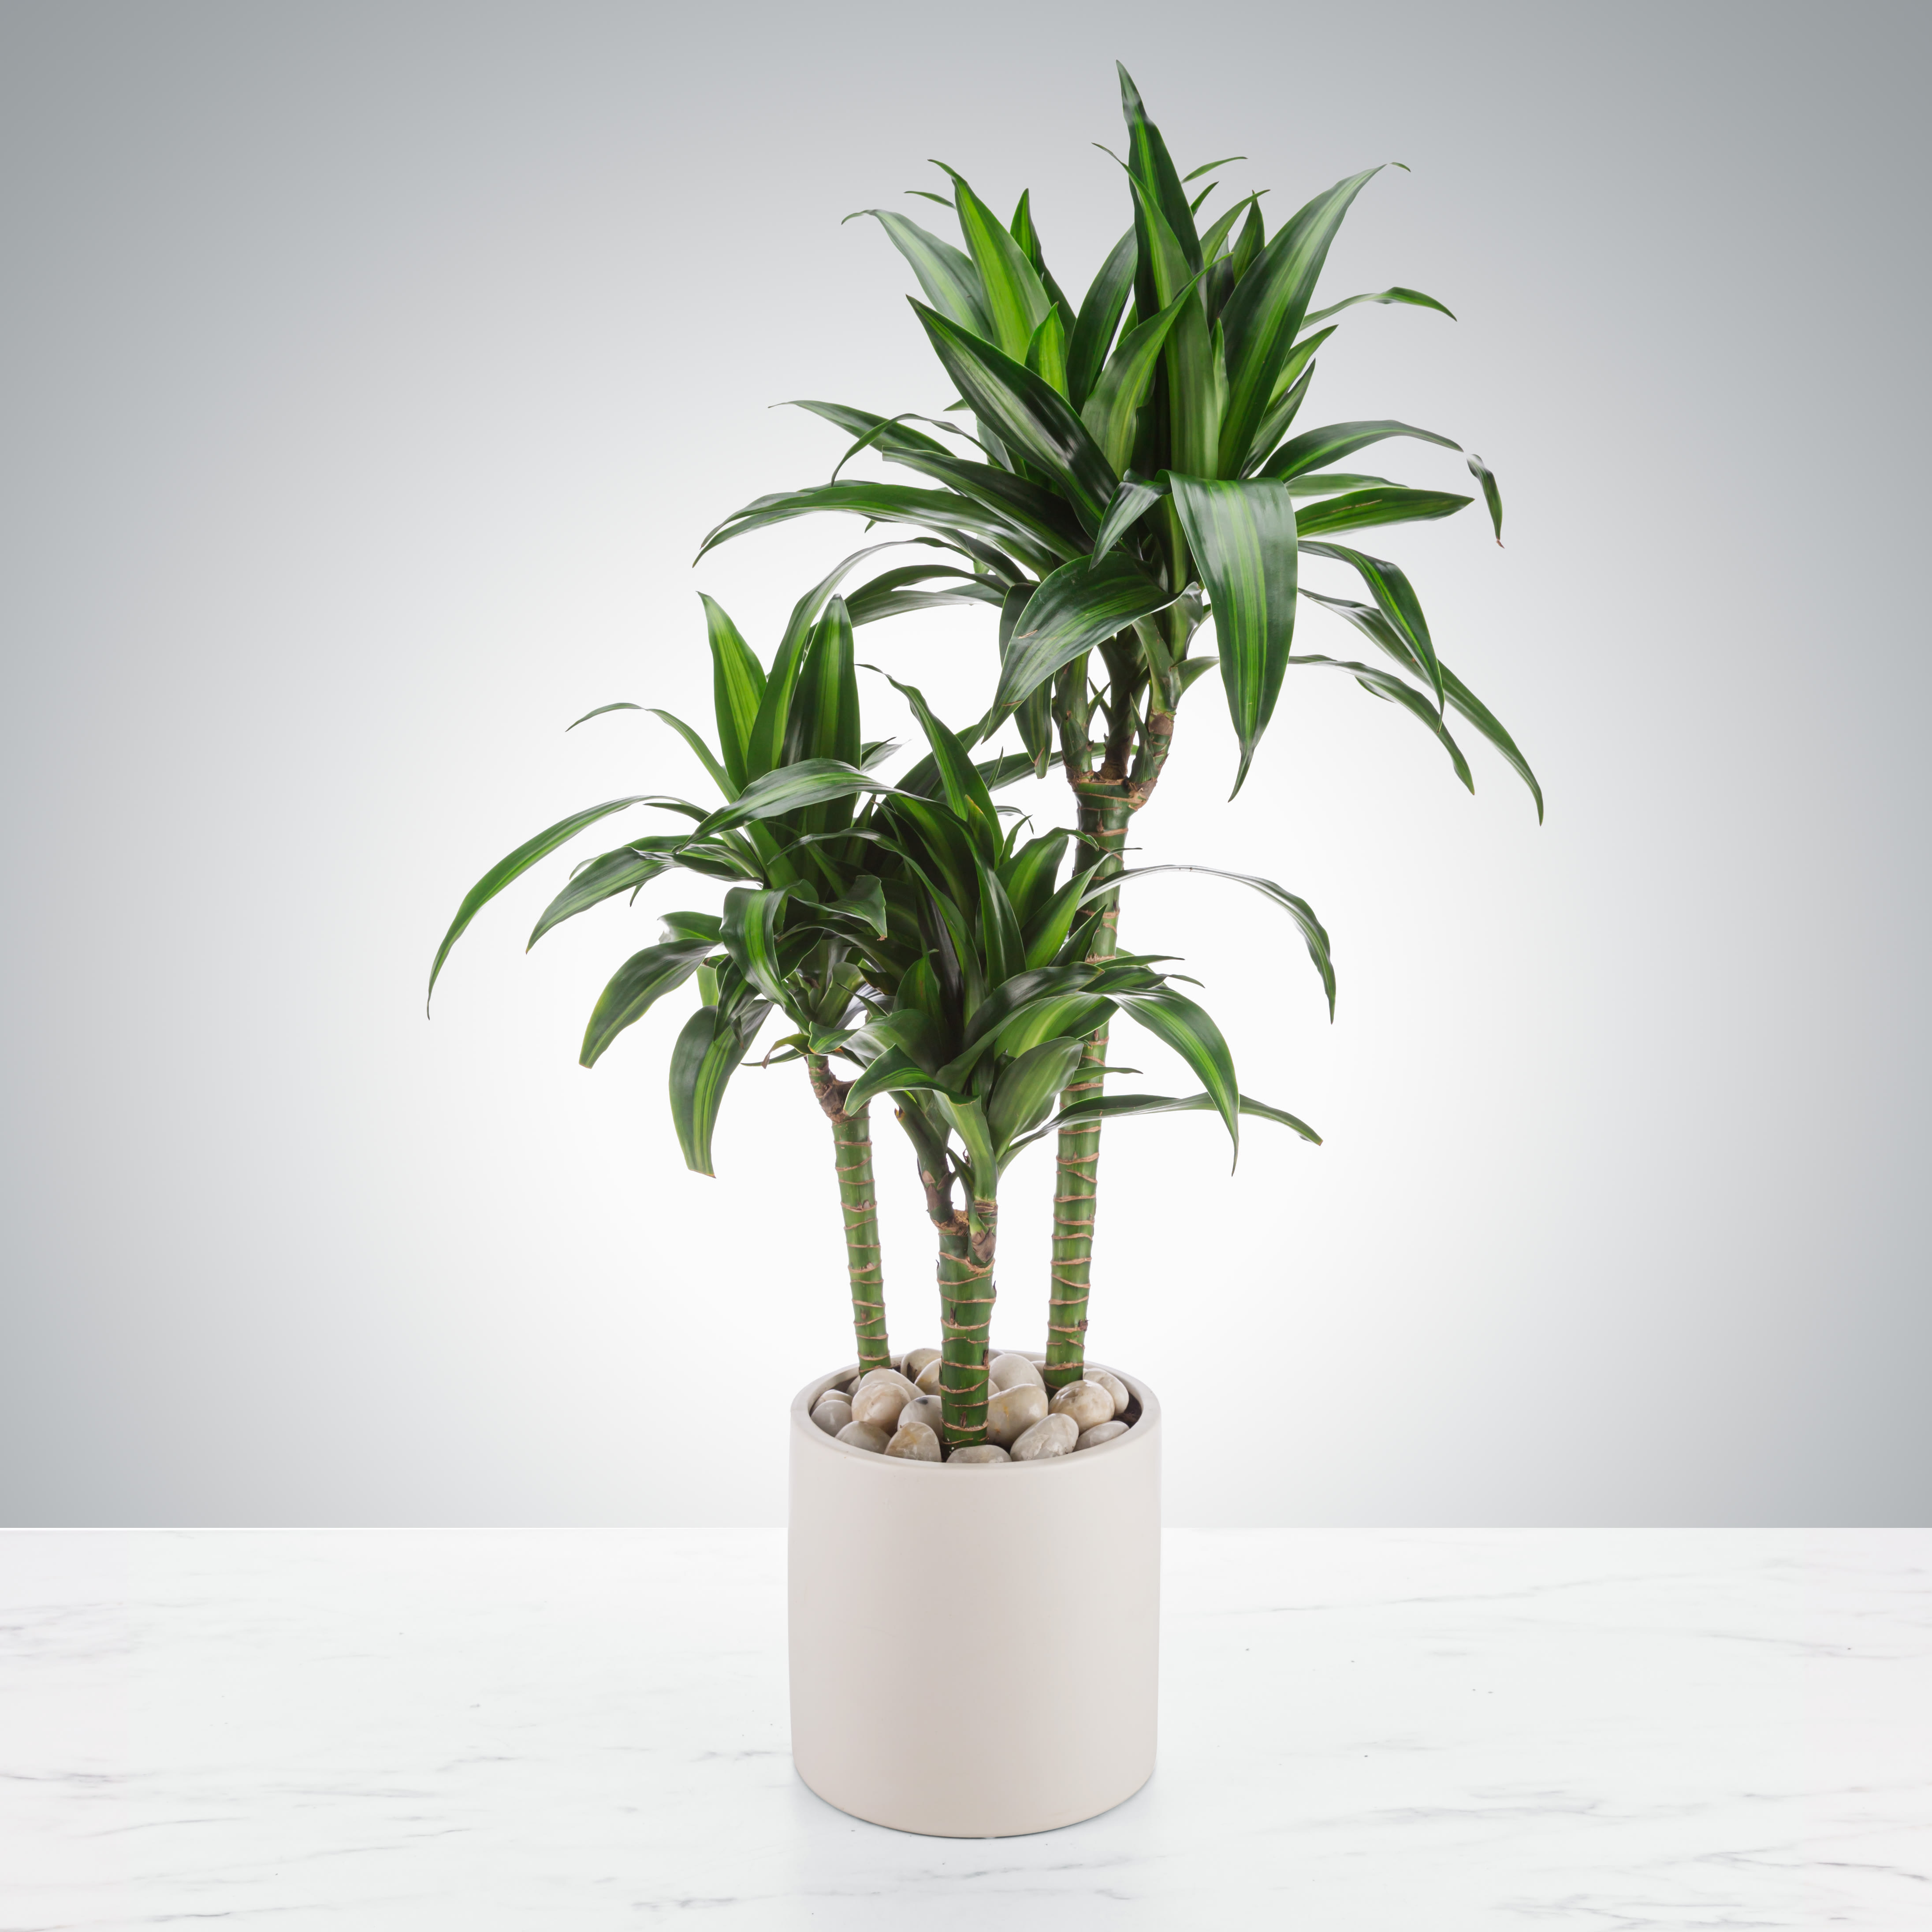 Tall Dracaena Plant by BloomNation™ - Dracaena Fragrans or corn plants can handle a variety of different types of light and can be mistaken for little trees. They do an excellent job filtering the air and make a big statement when sent as a gift.